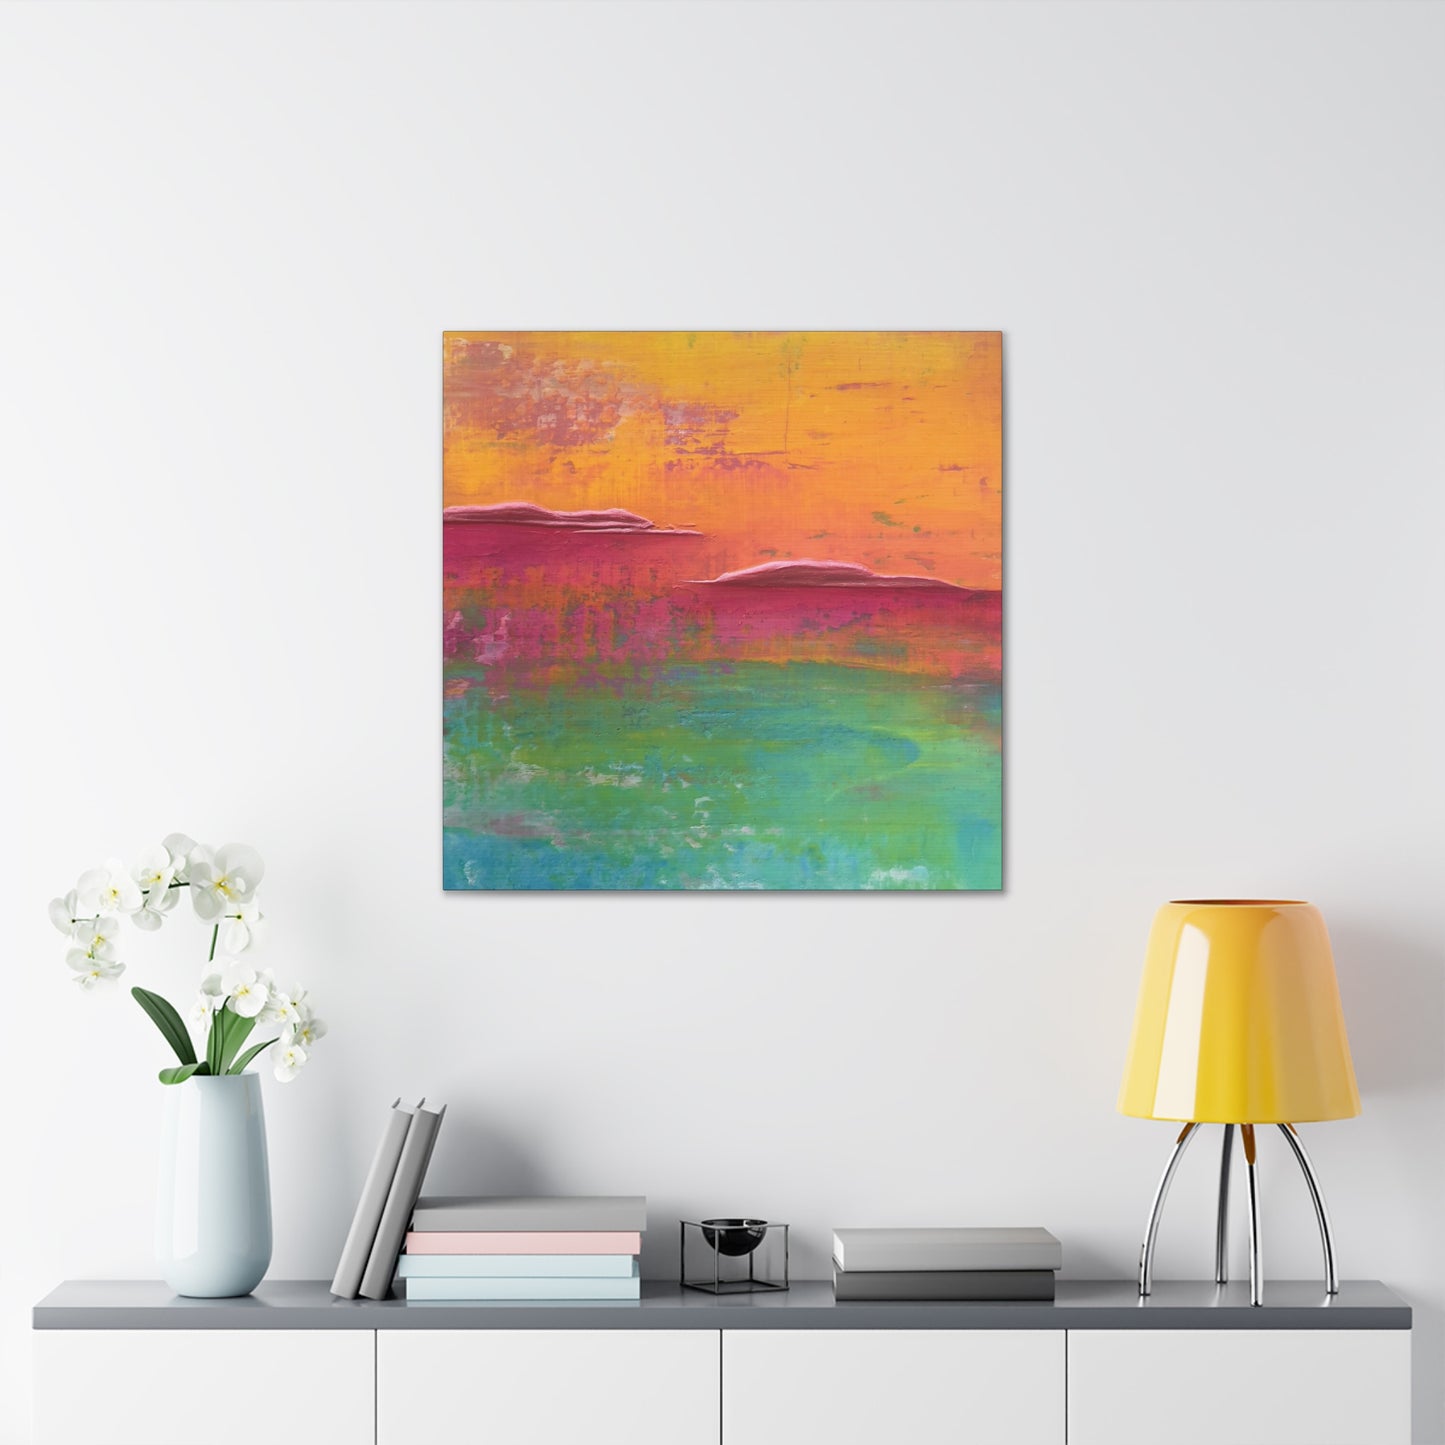 Sparkling - Unframed Gallery Wrapped Canvas